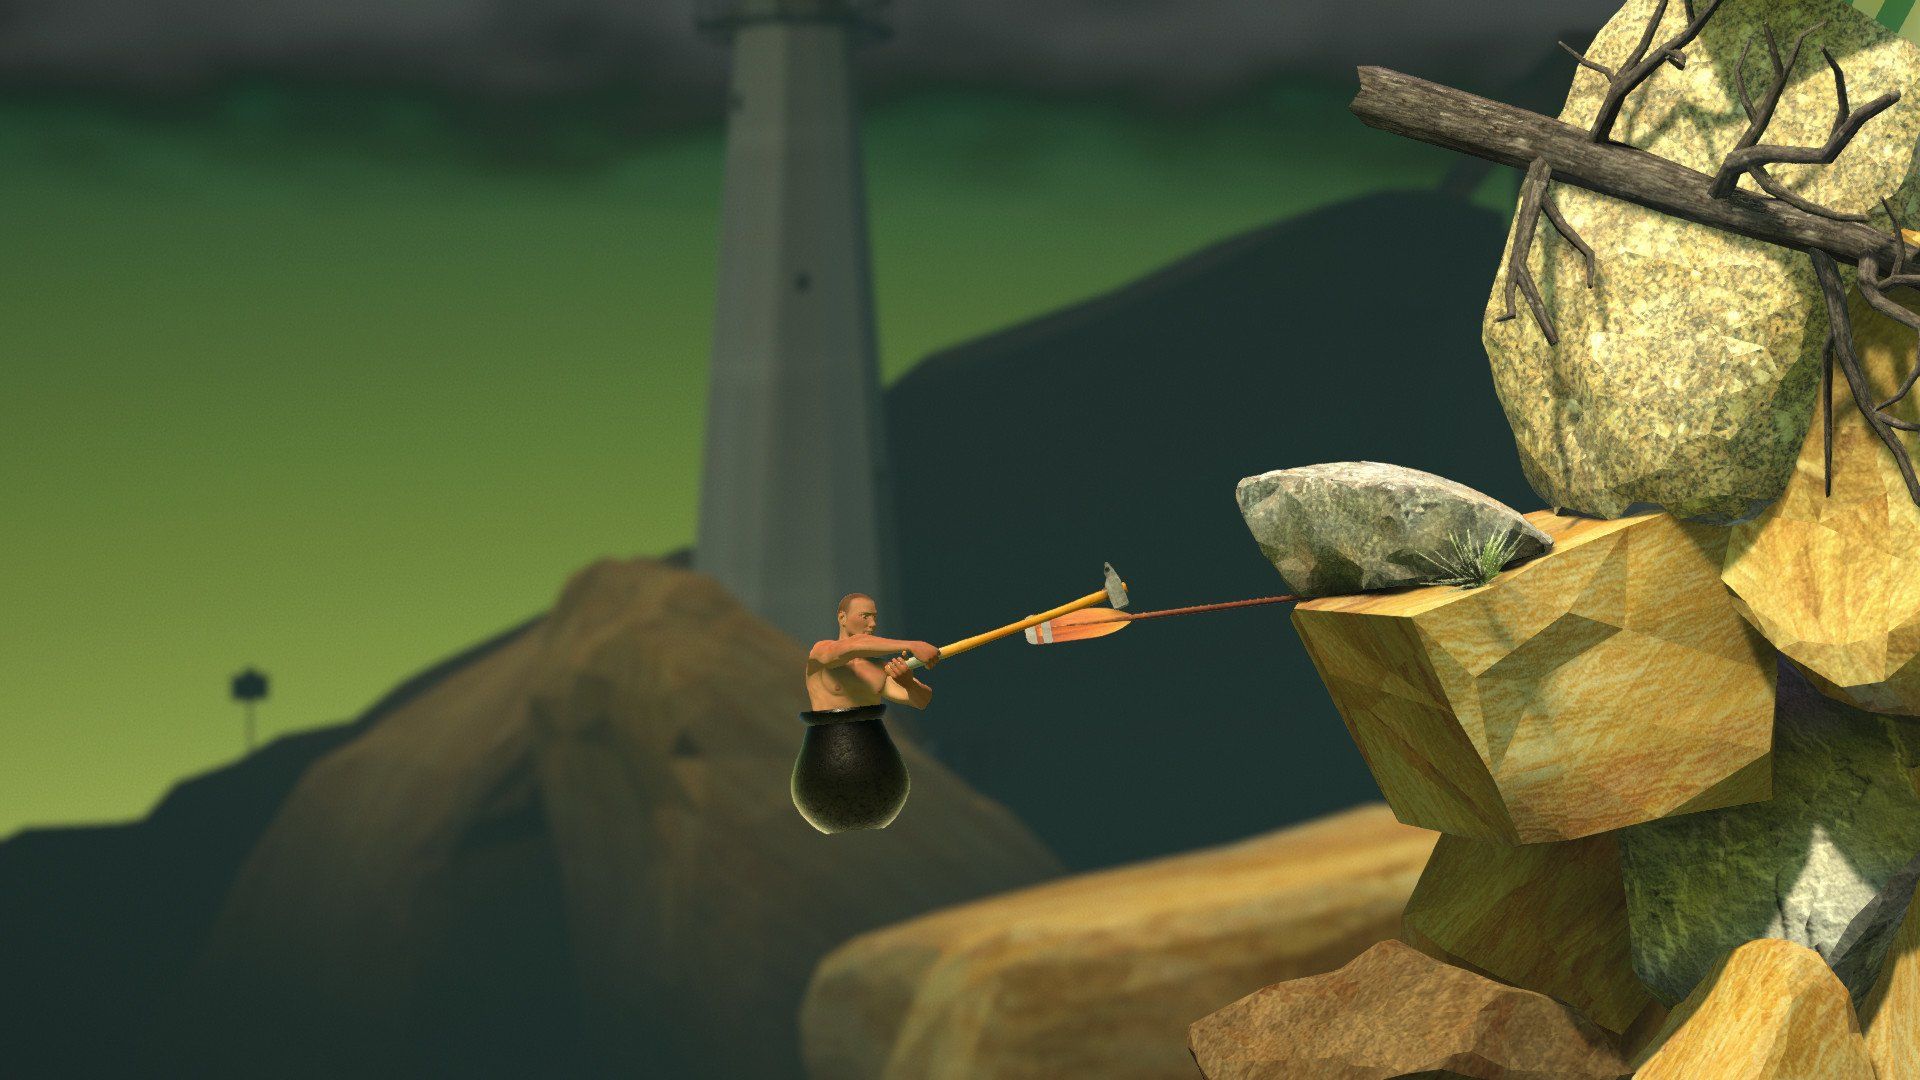 Getting Over It with Bennett Foddy HD Wallpaper. Background